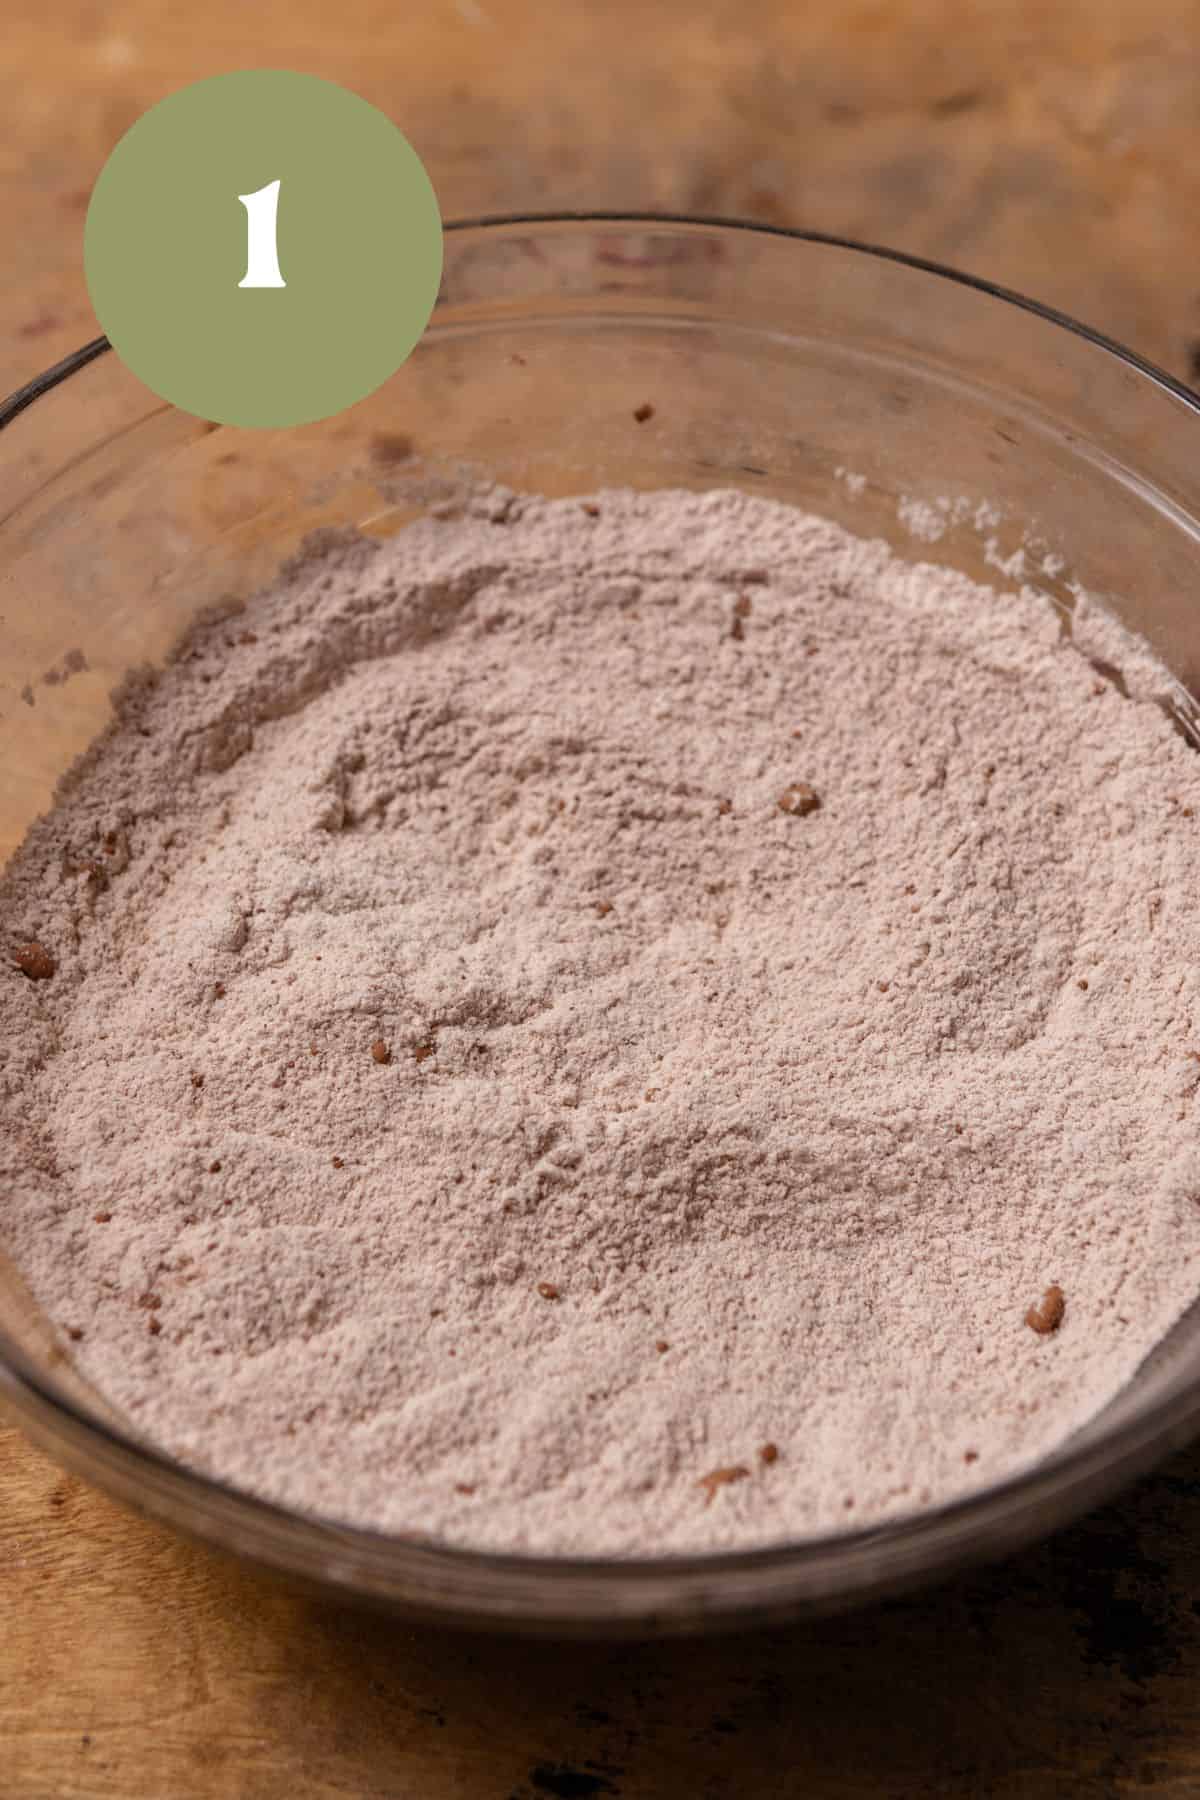 Dry cake ingredients in a glass bowl.